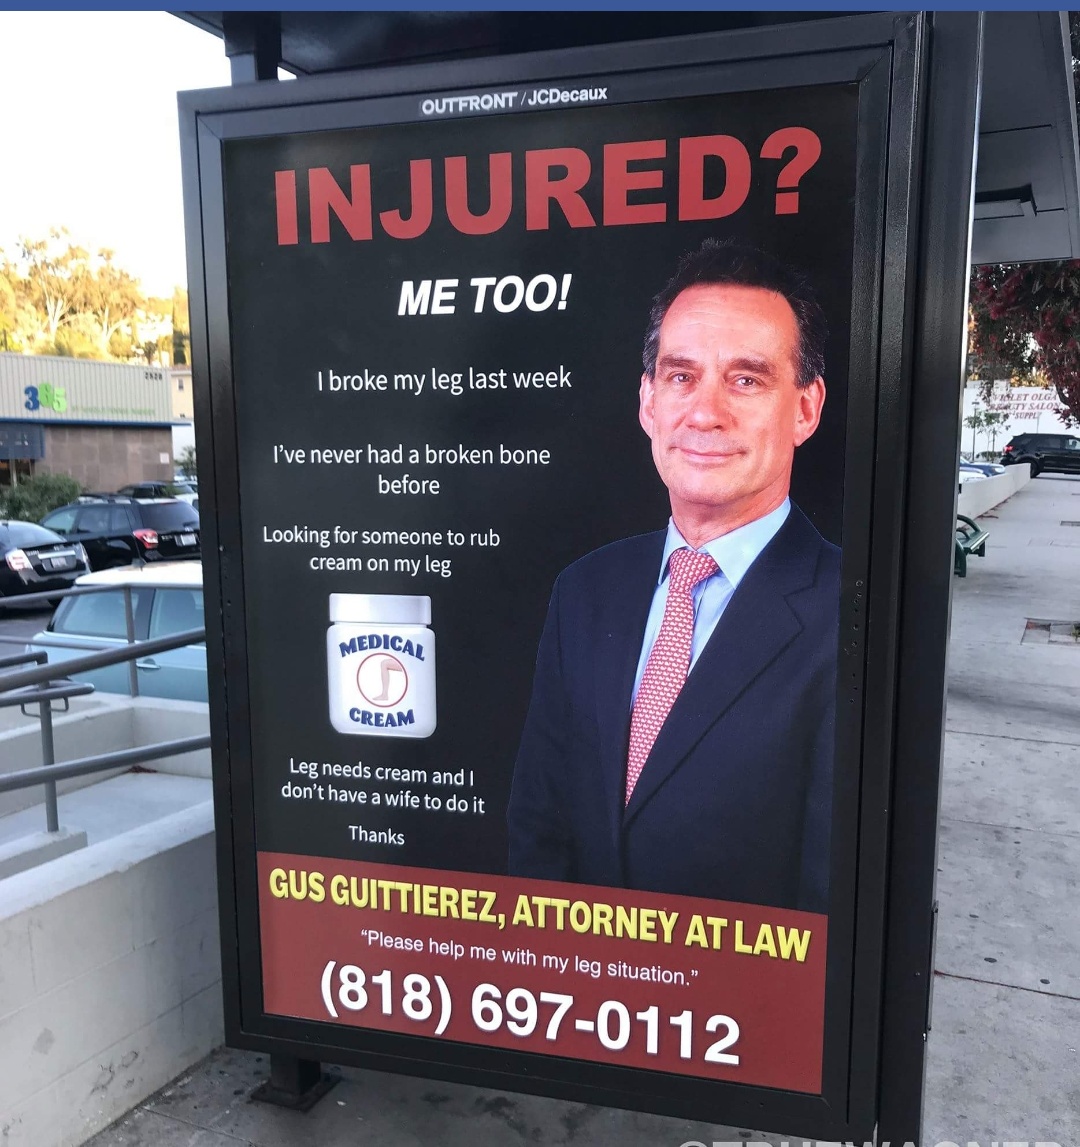 injured me too - OutfrontJCDecaux Injured? Me Too! I broke my leg last week Tolga Auty Salos I've never had a broken bone before Looking for someone to rub cream on my leg Medical Cream Leg needs cream and I don't have a wife to do it Thanks Gus Guittiere